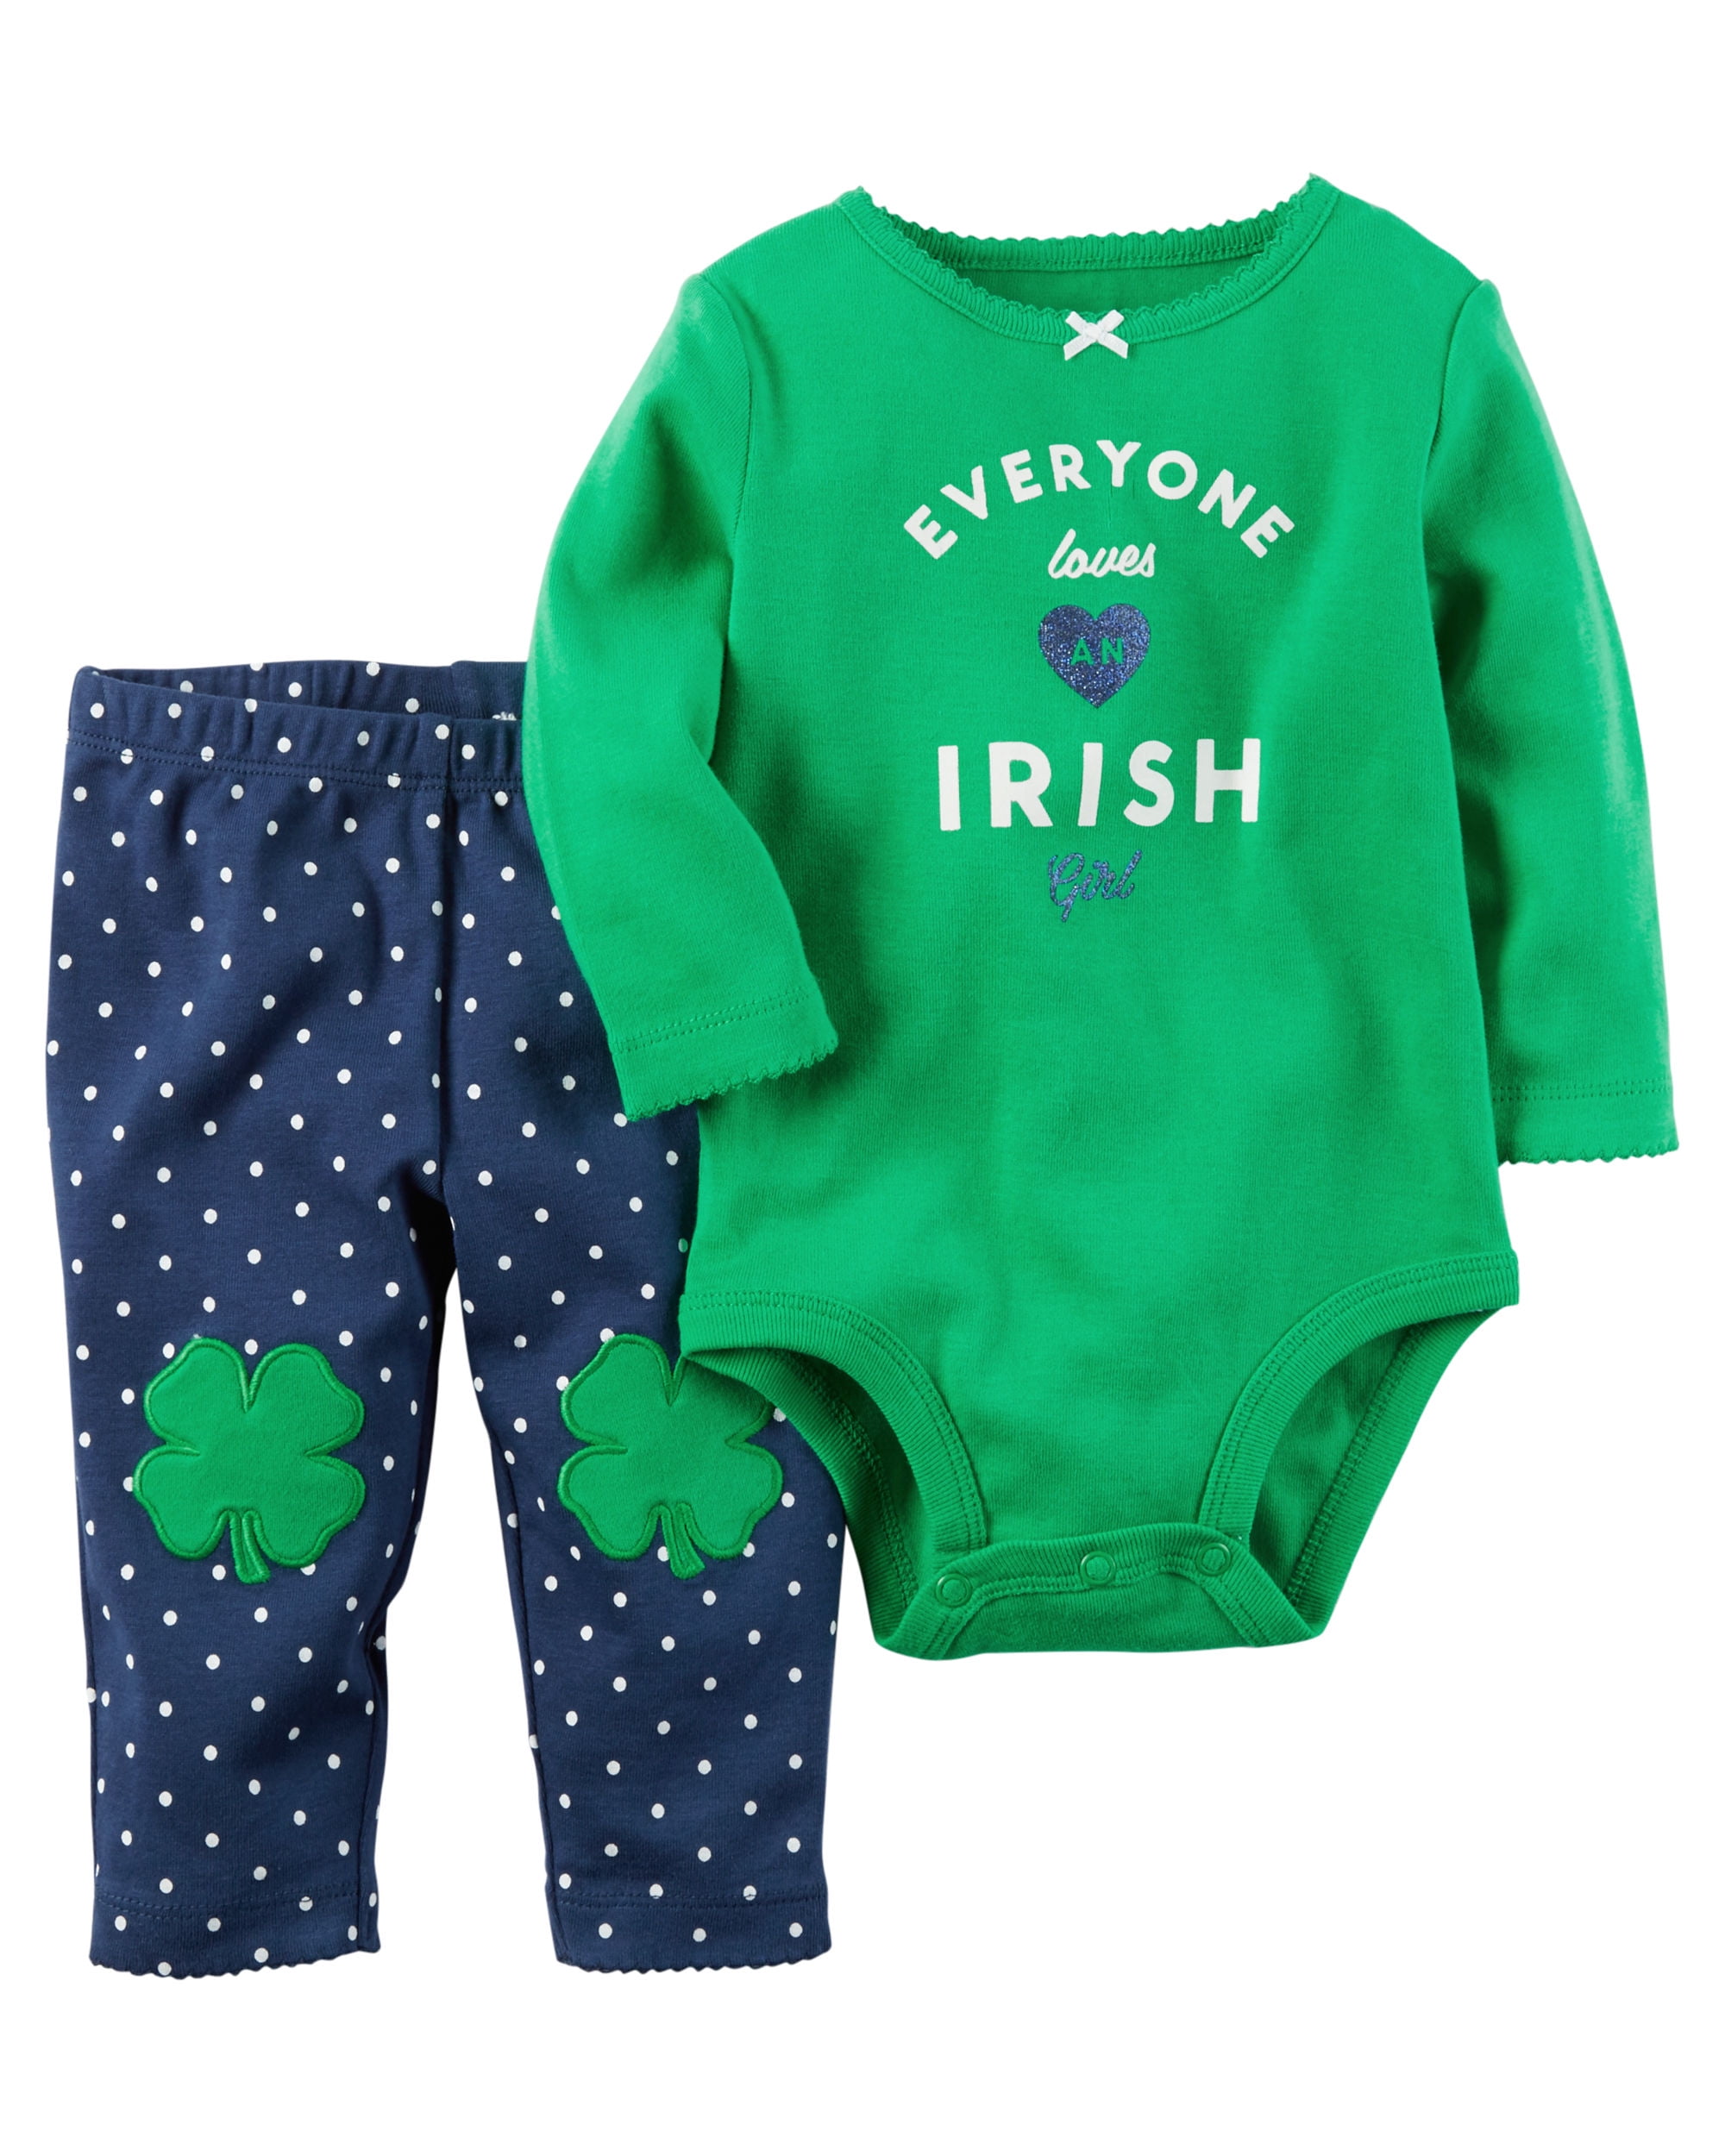 carters st patrick's day baby